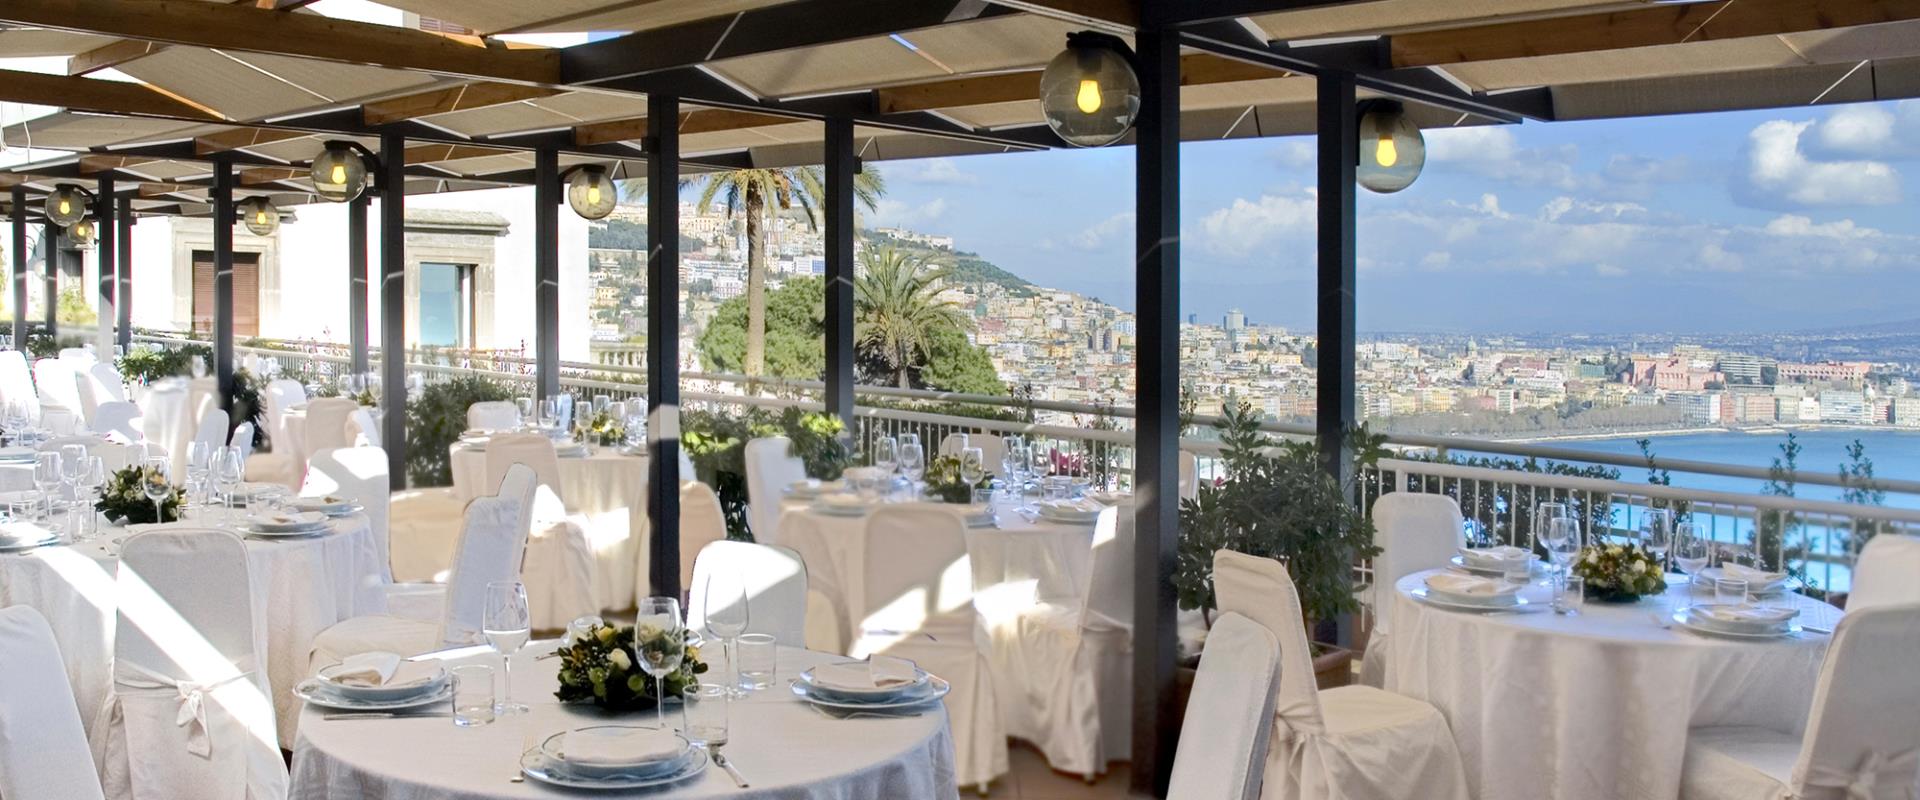 Book for your reception the Paradsiblanco Restaurant, on the top floor of theBW Signature Collection Hotel Paradiso. It will be an unforgettable occasion